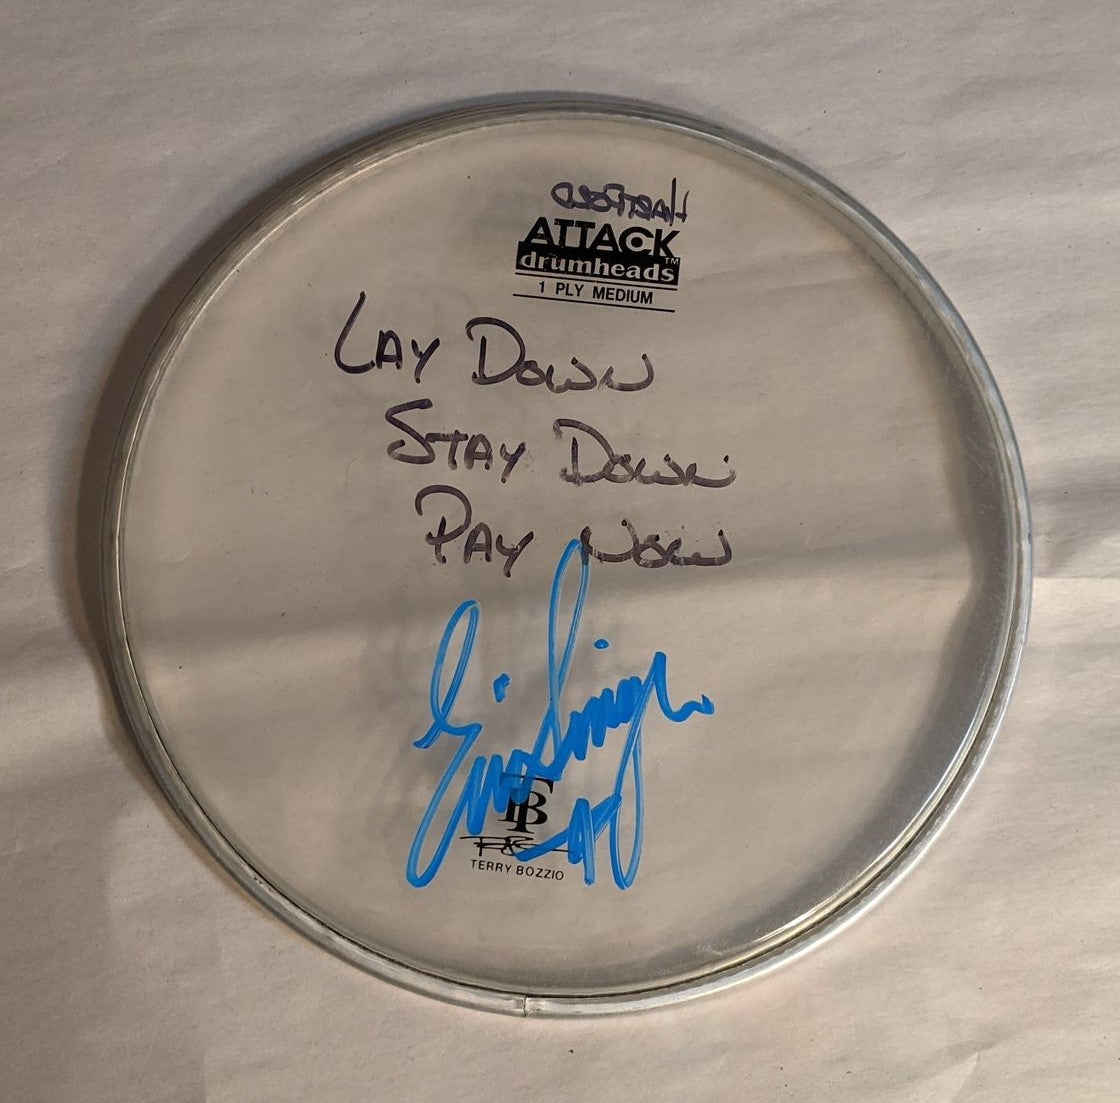 HARTFORD 9-23-2012 ERIC SINGER Stage-Used Signed drumheads